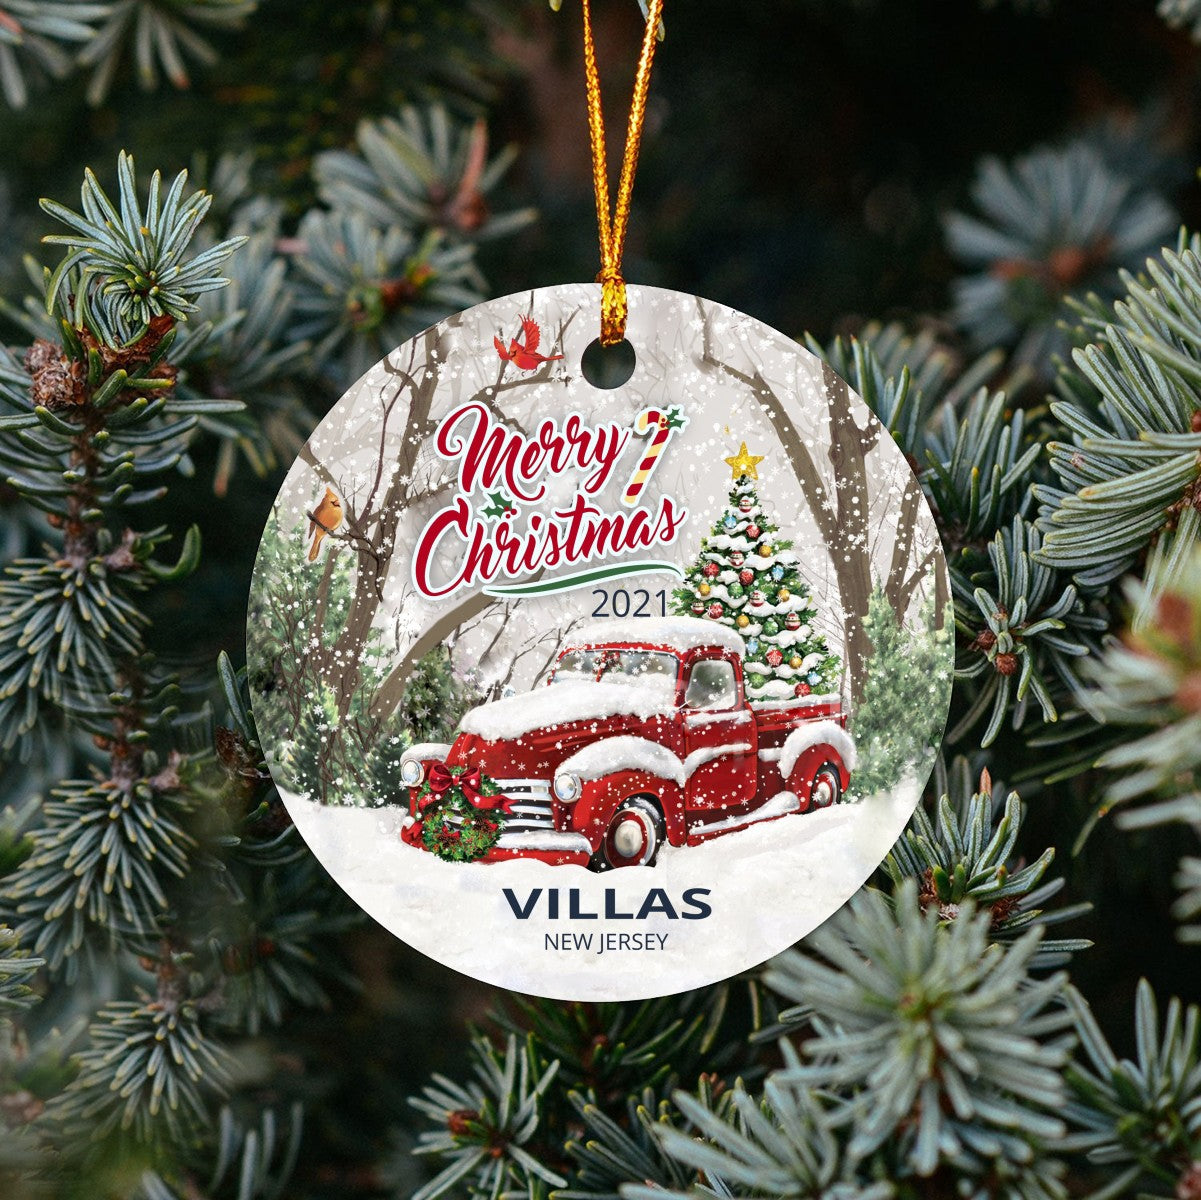 Christmas Tree Ornaments Villas - Ornament With Name City, State Villas New Jersey NJ Ornament - Red Truck Xmas Ornaments 3'' Plastic Gift For Family, Friend And Housewarming